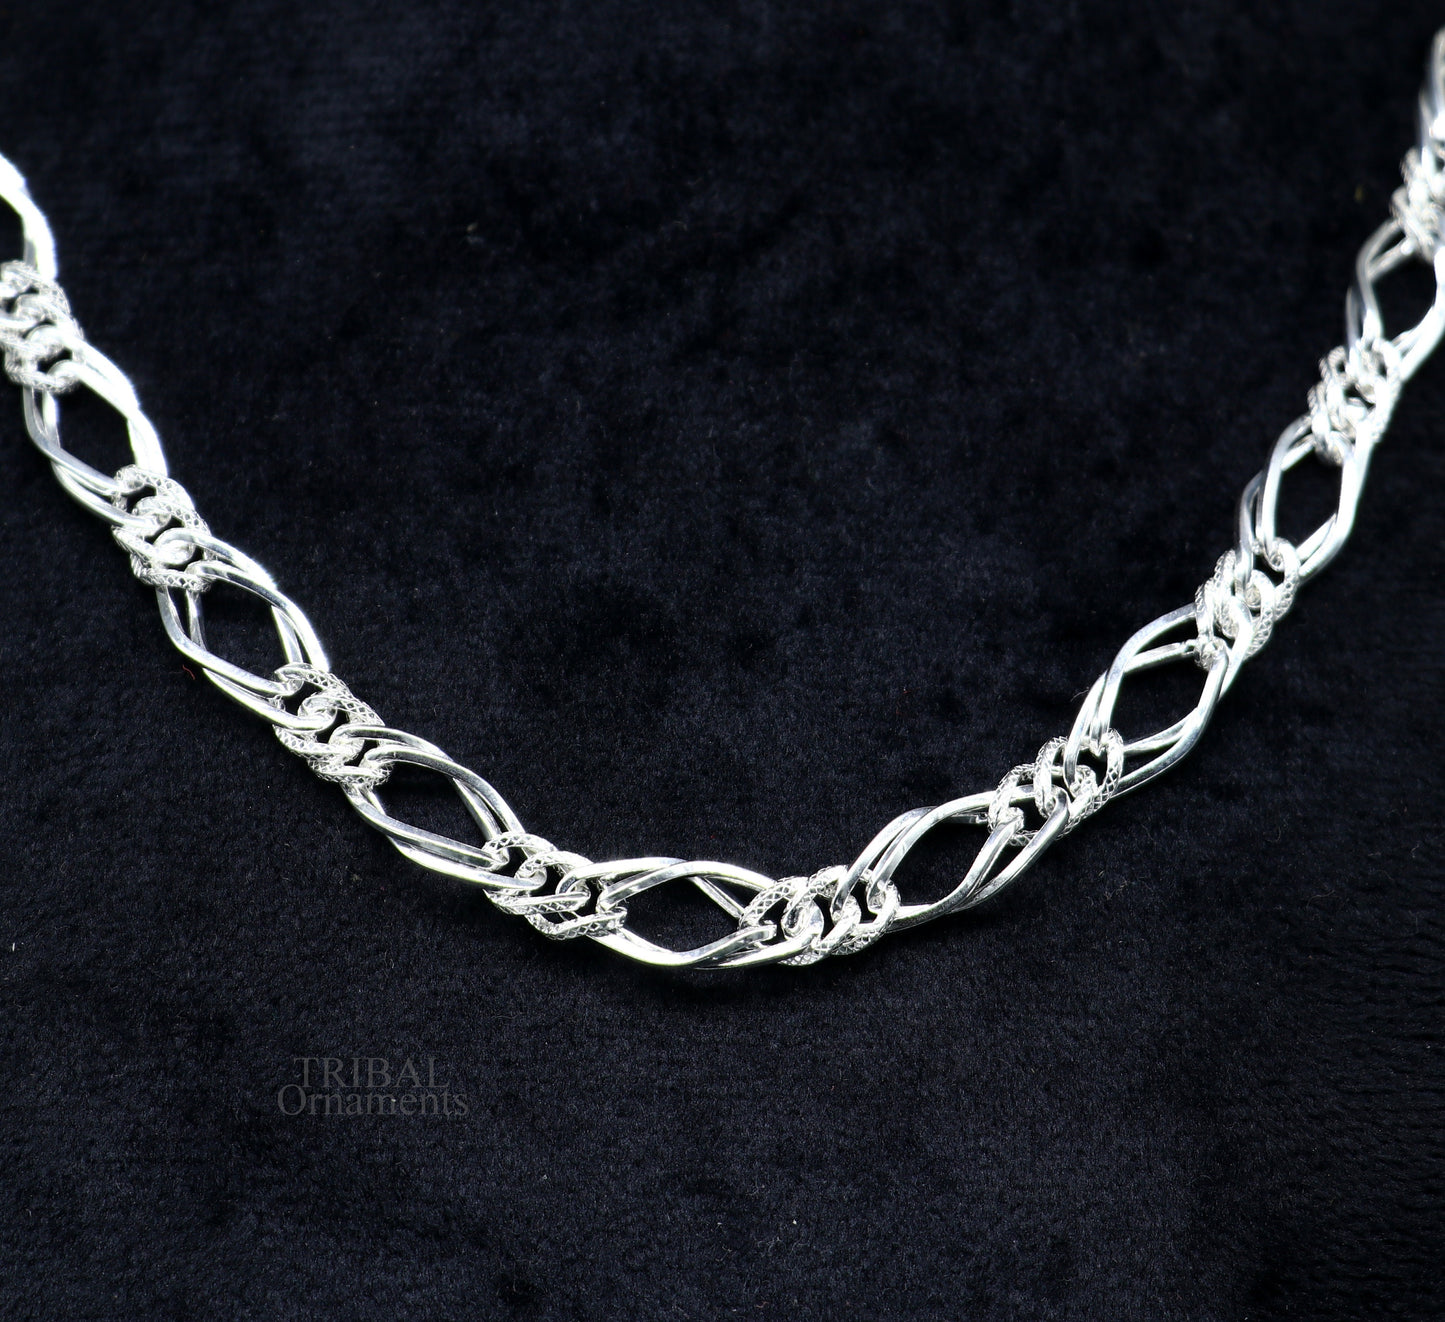 Amazing unique stylish 20" 925 sterling silver 6mm handmade amazing chain necklace excellent gifting jewelry, men's chain necklace nch341 - TRIBAL ORNAMENTS